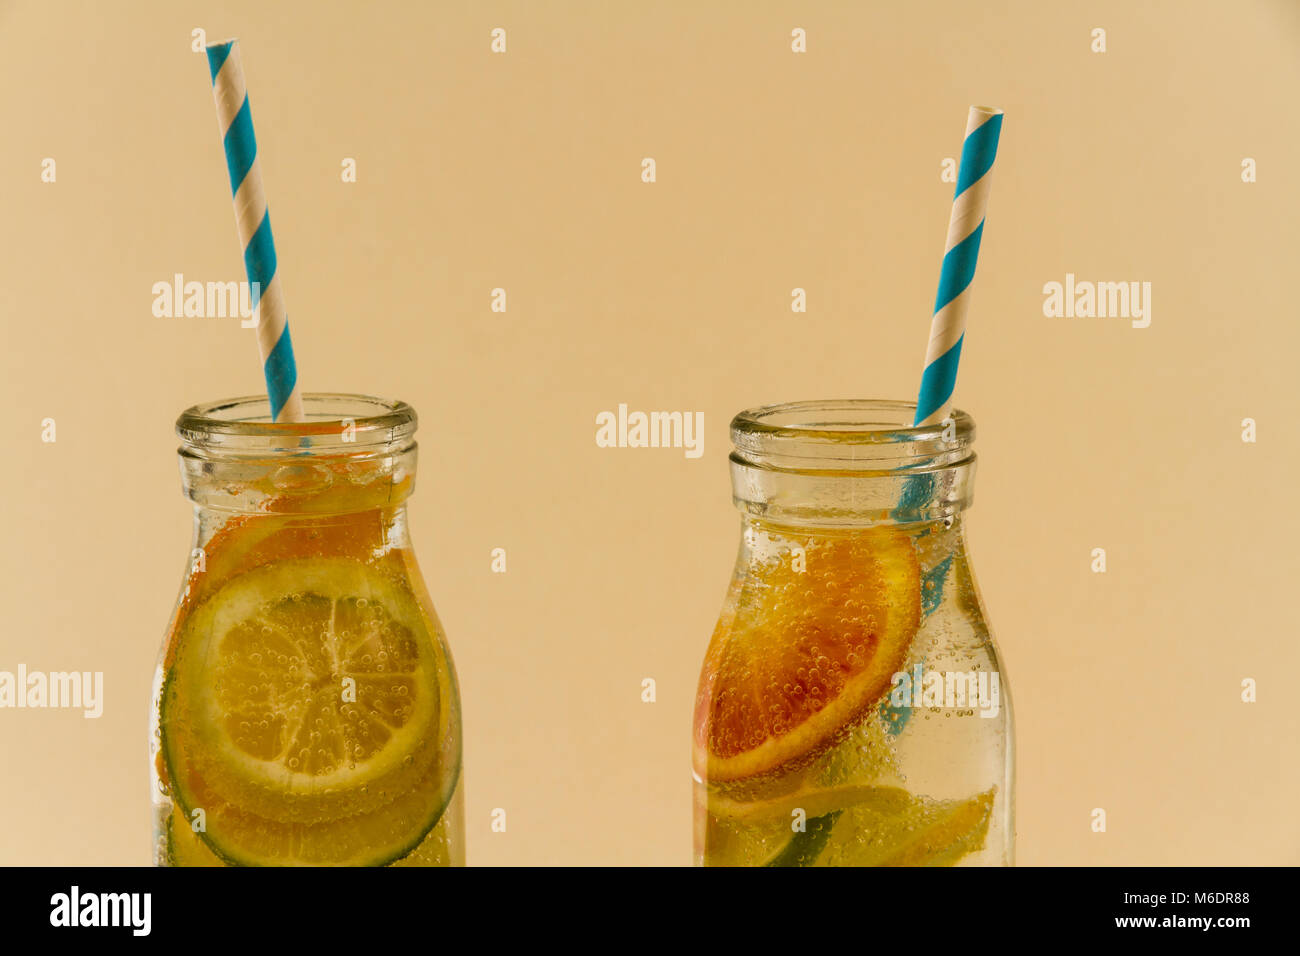 Children’s sparkling water drinks in bottles with straw. Slices of orange, lemon and lime. Stock Photo